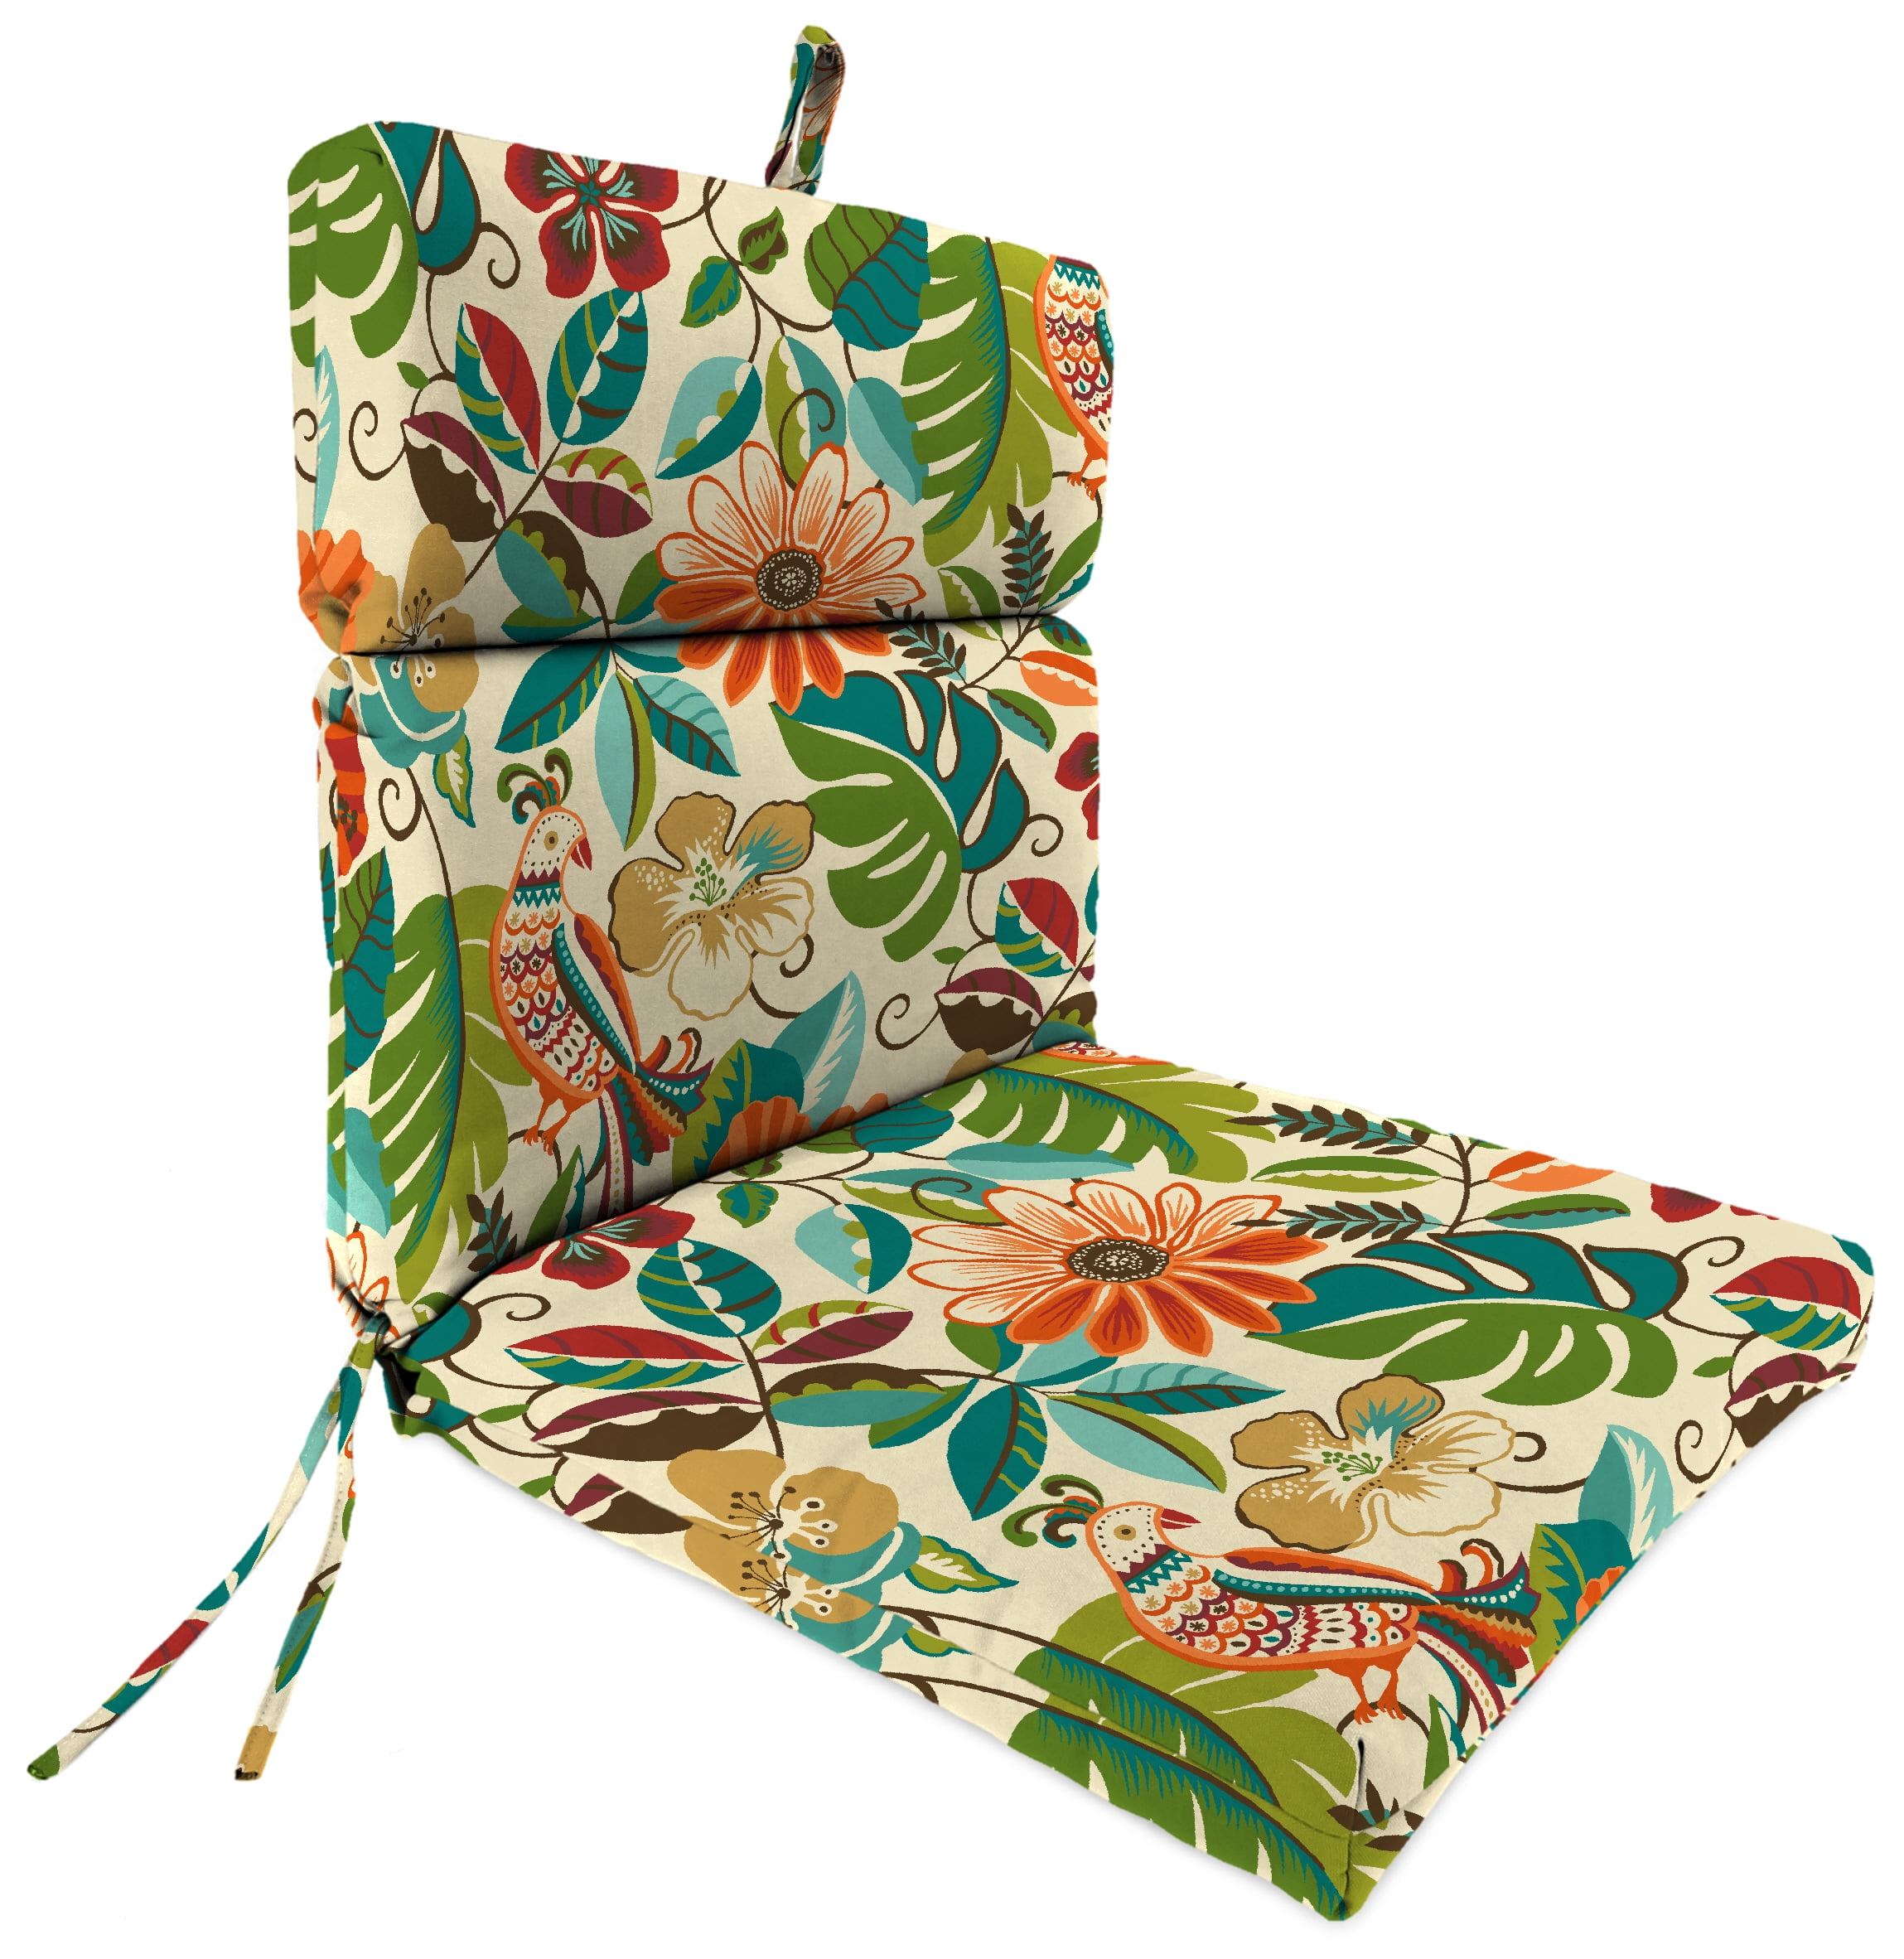 Cleaning And Re-stuffing Outdoor Furniture Cushions - The Emerging